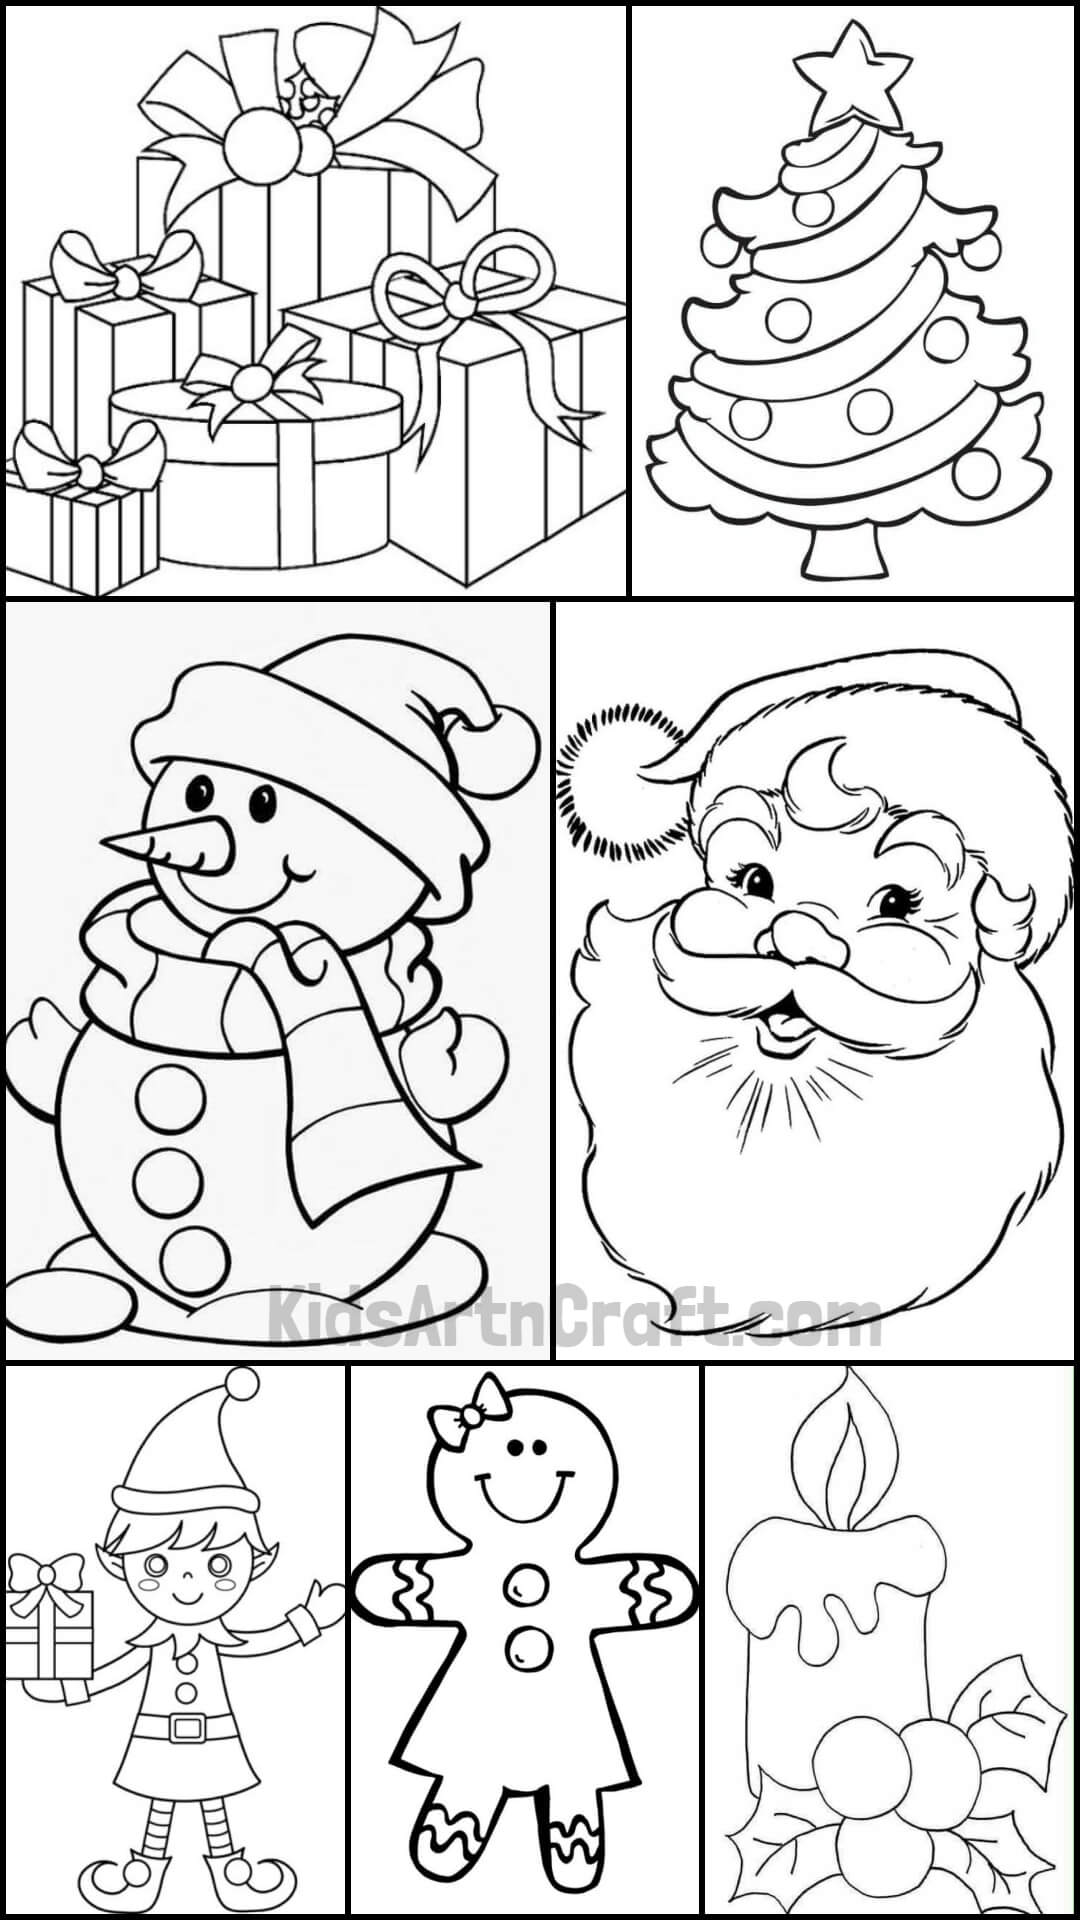 Printable Christmas Coloring Pages for Preschoolers